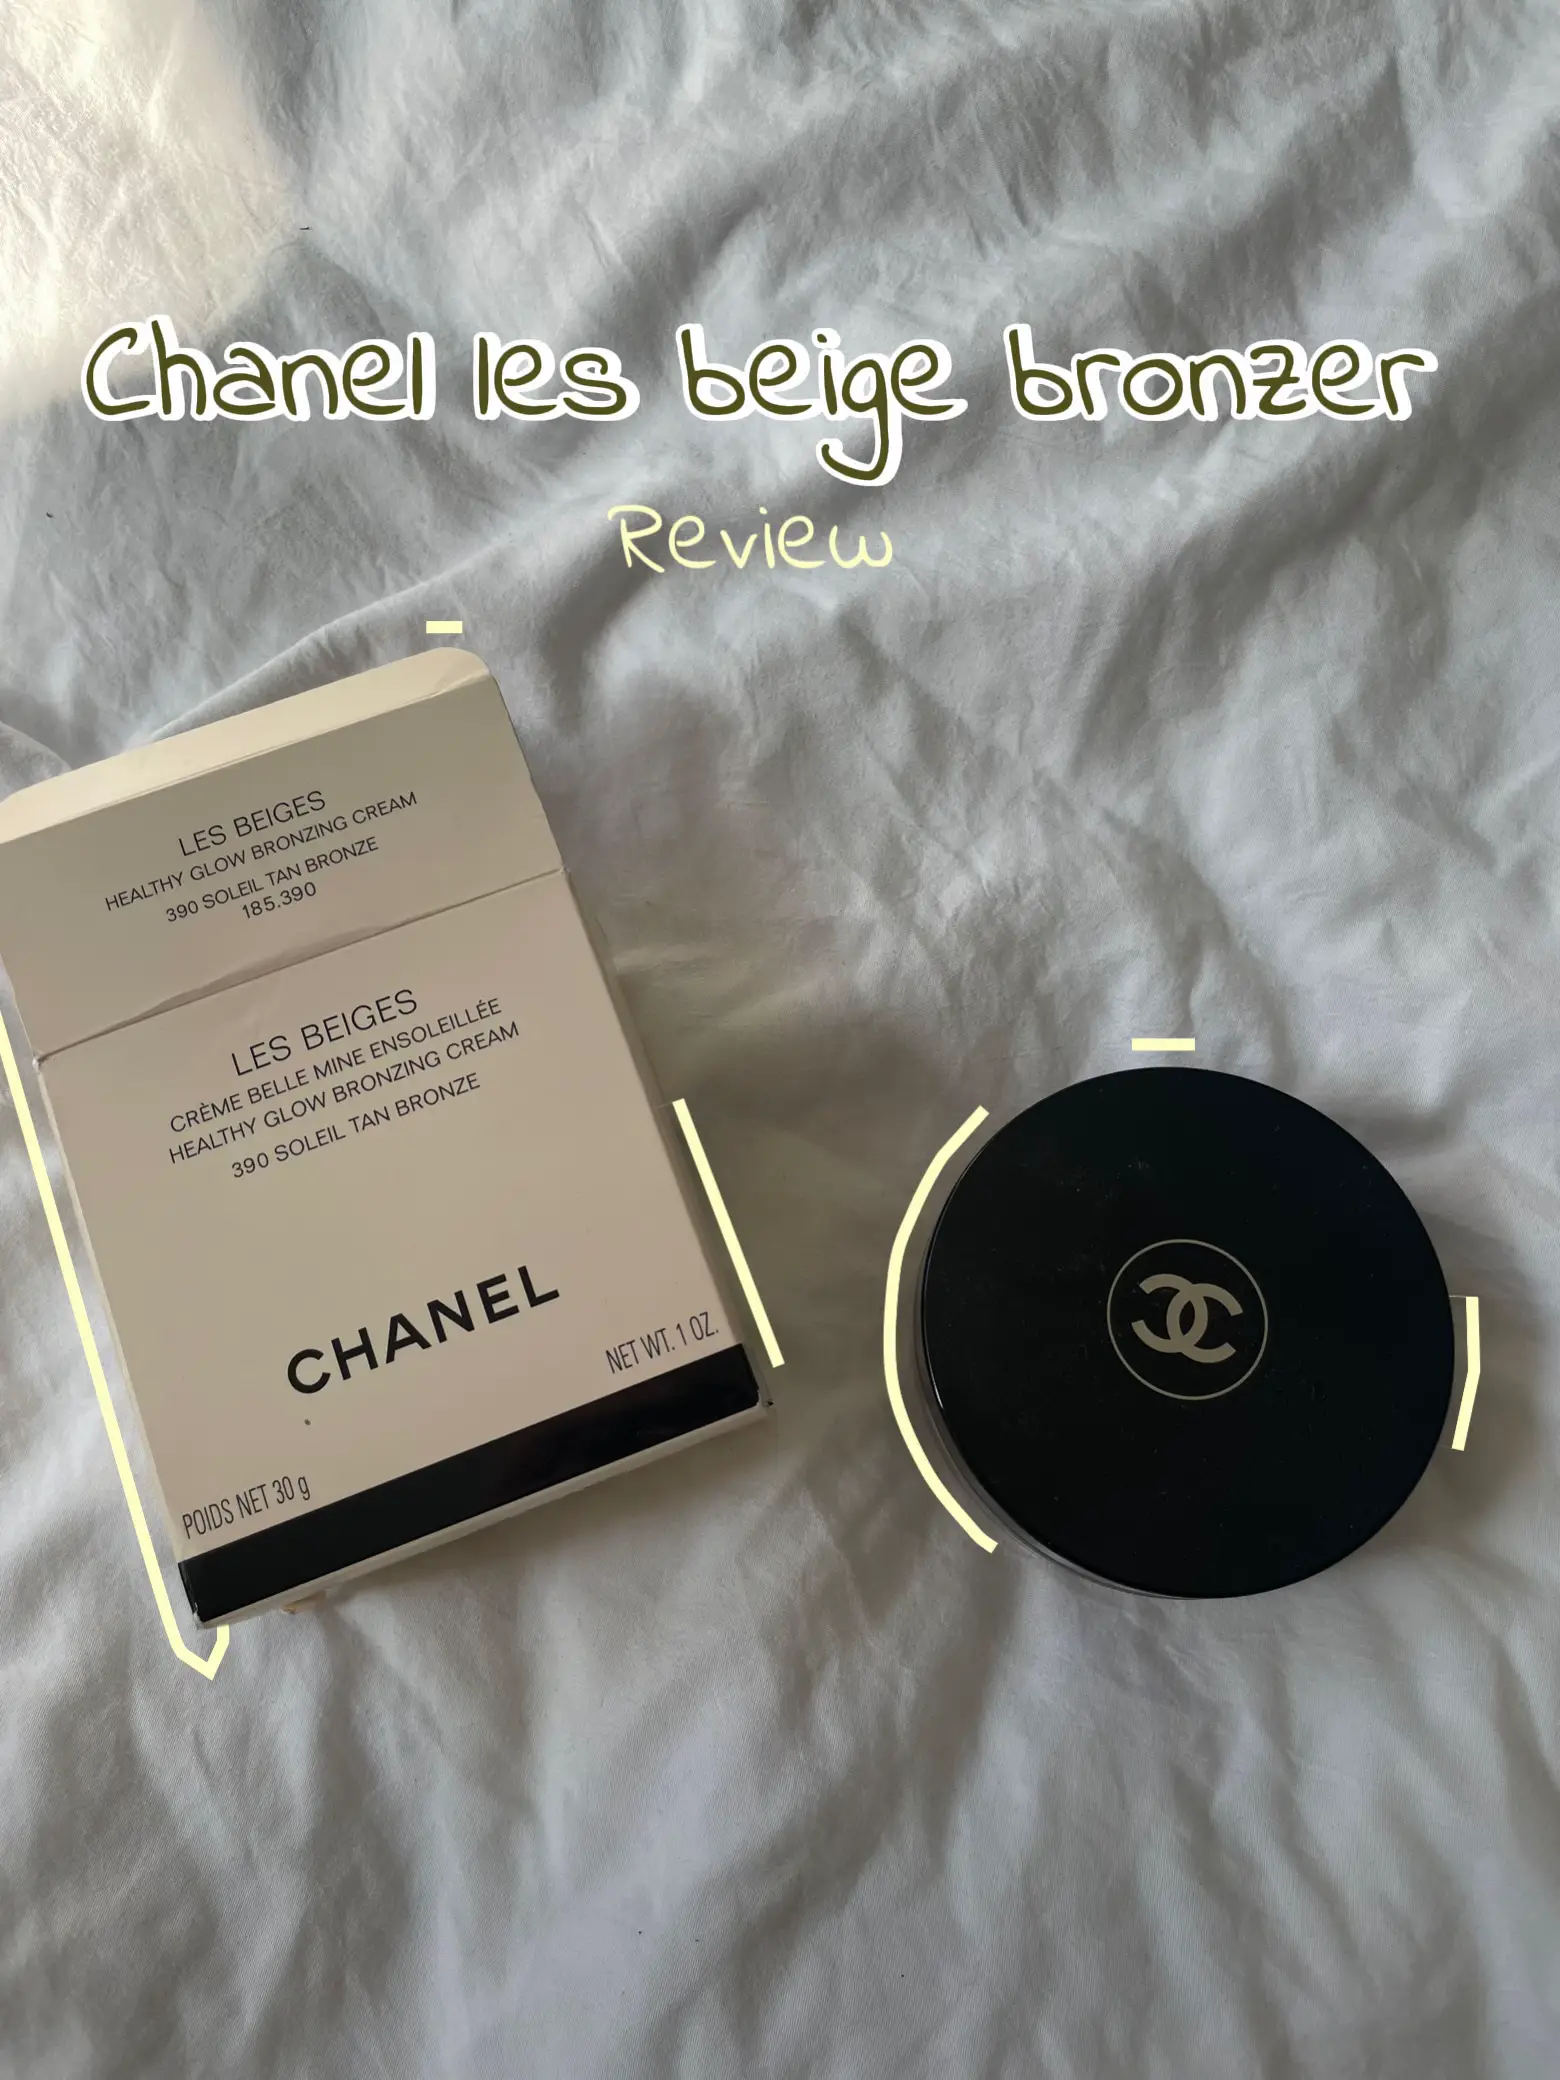 Chanel tan de soleil bronzer, Gallery posted by Glambyroxy